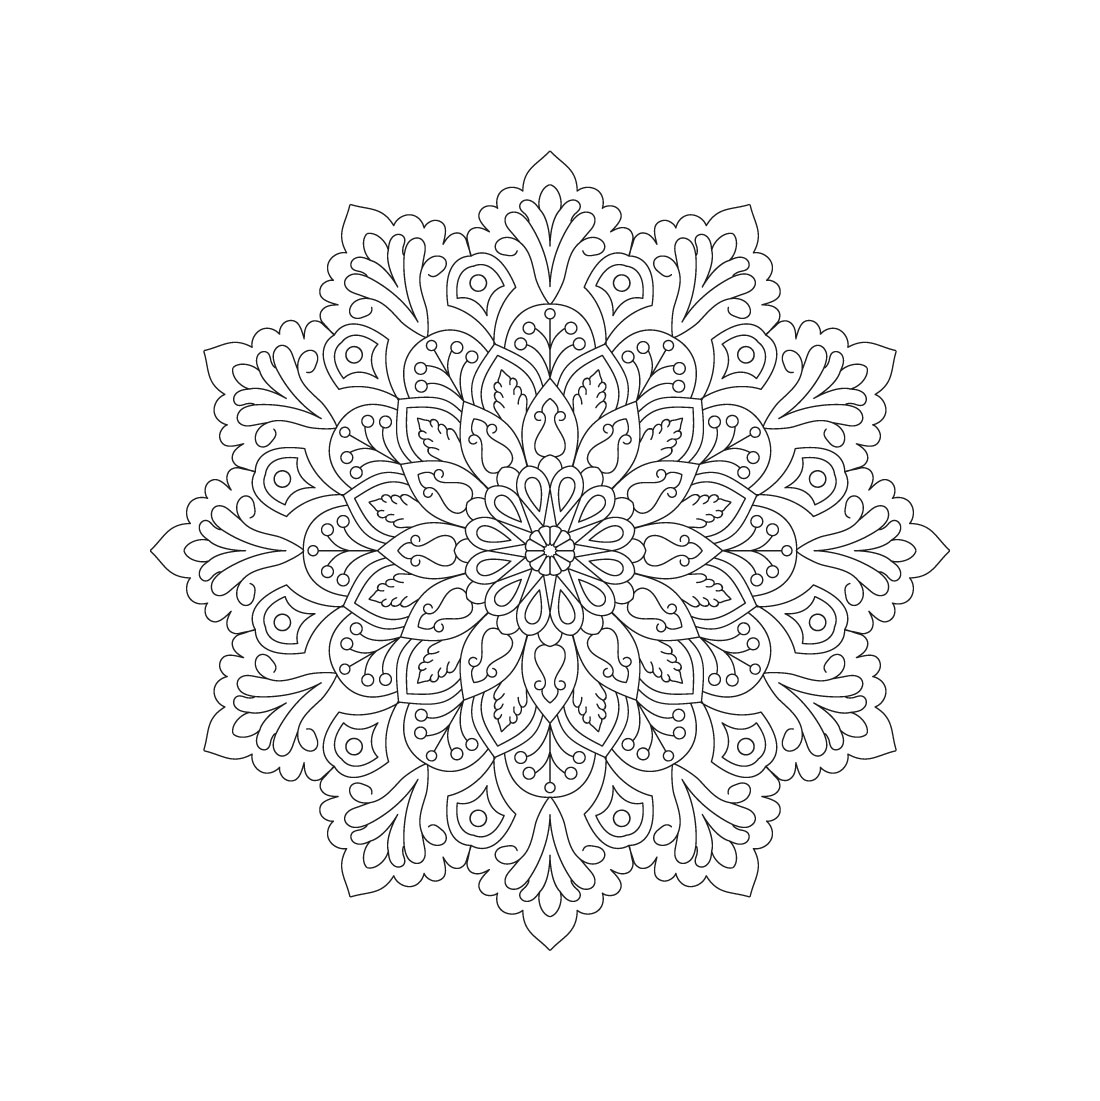 bundle of 10 tranquility mandala coloring book pages 08 572